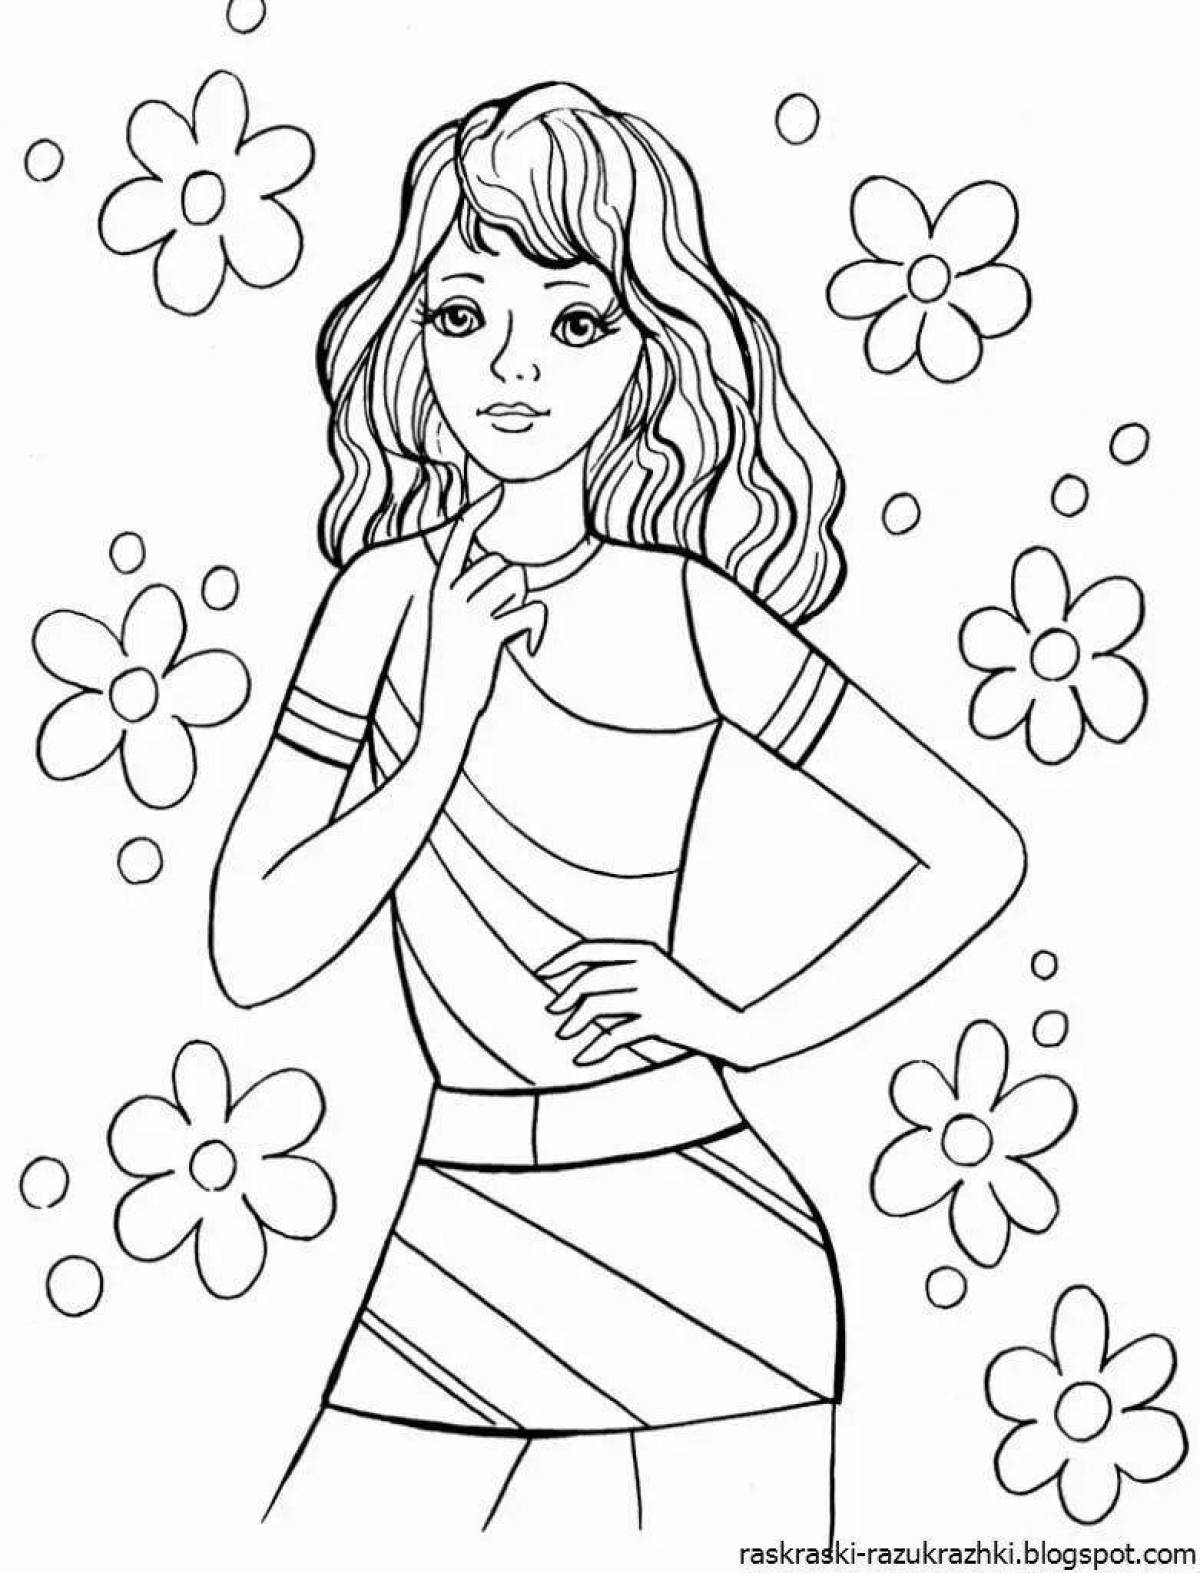 Color Explosion Coloring Page for 12 year old girls